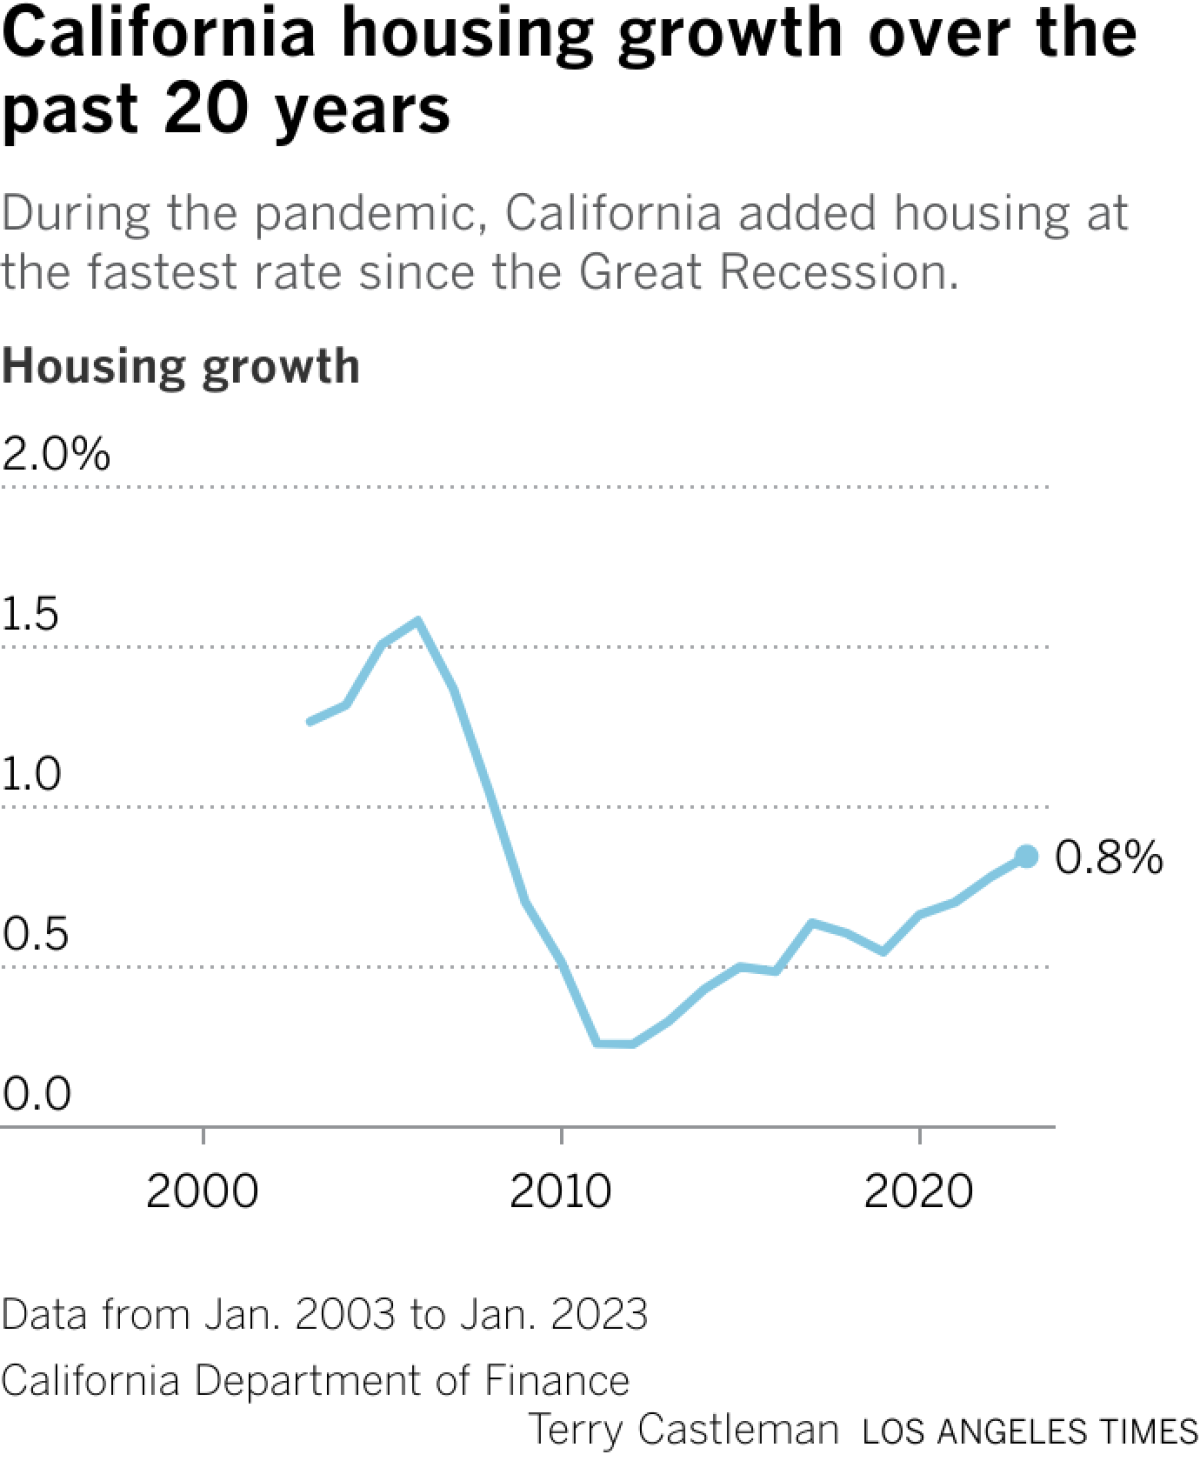 A chart showing housing growth rates for California over the past 20 years.